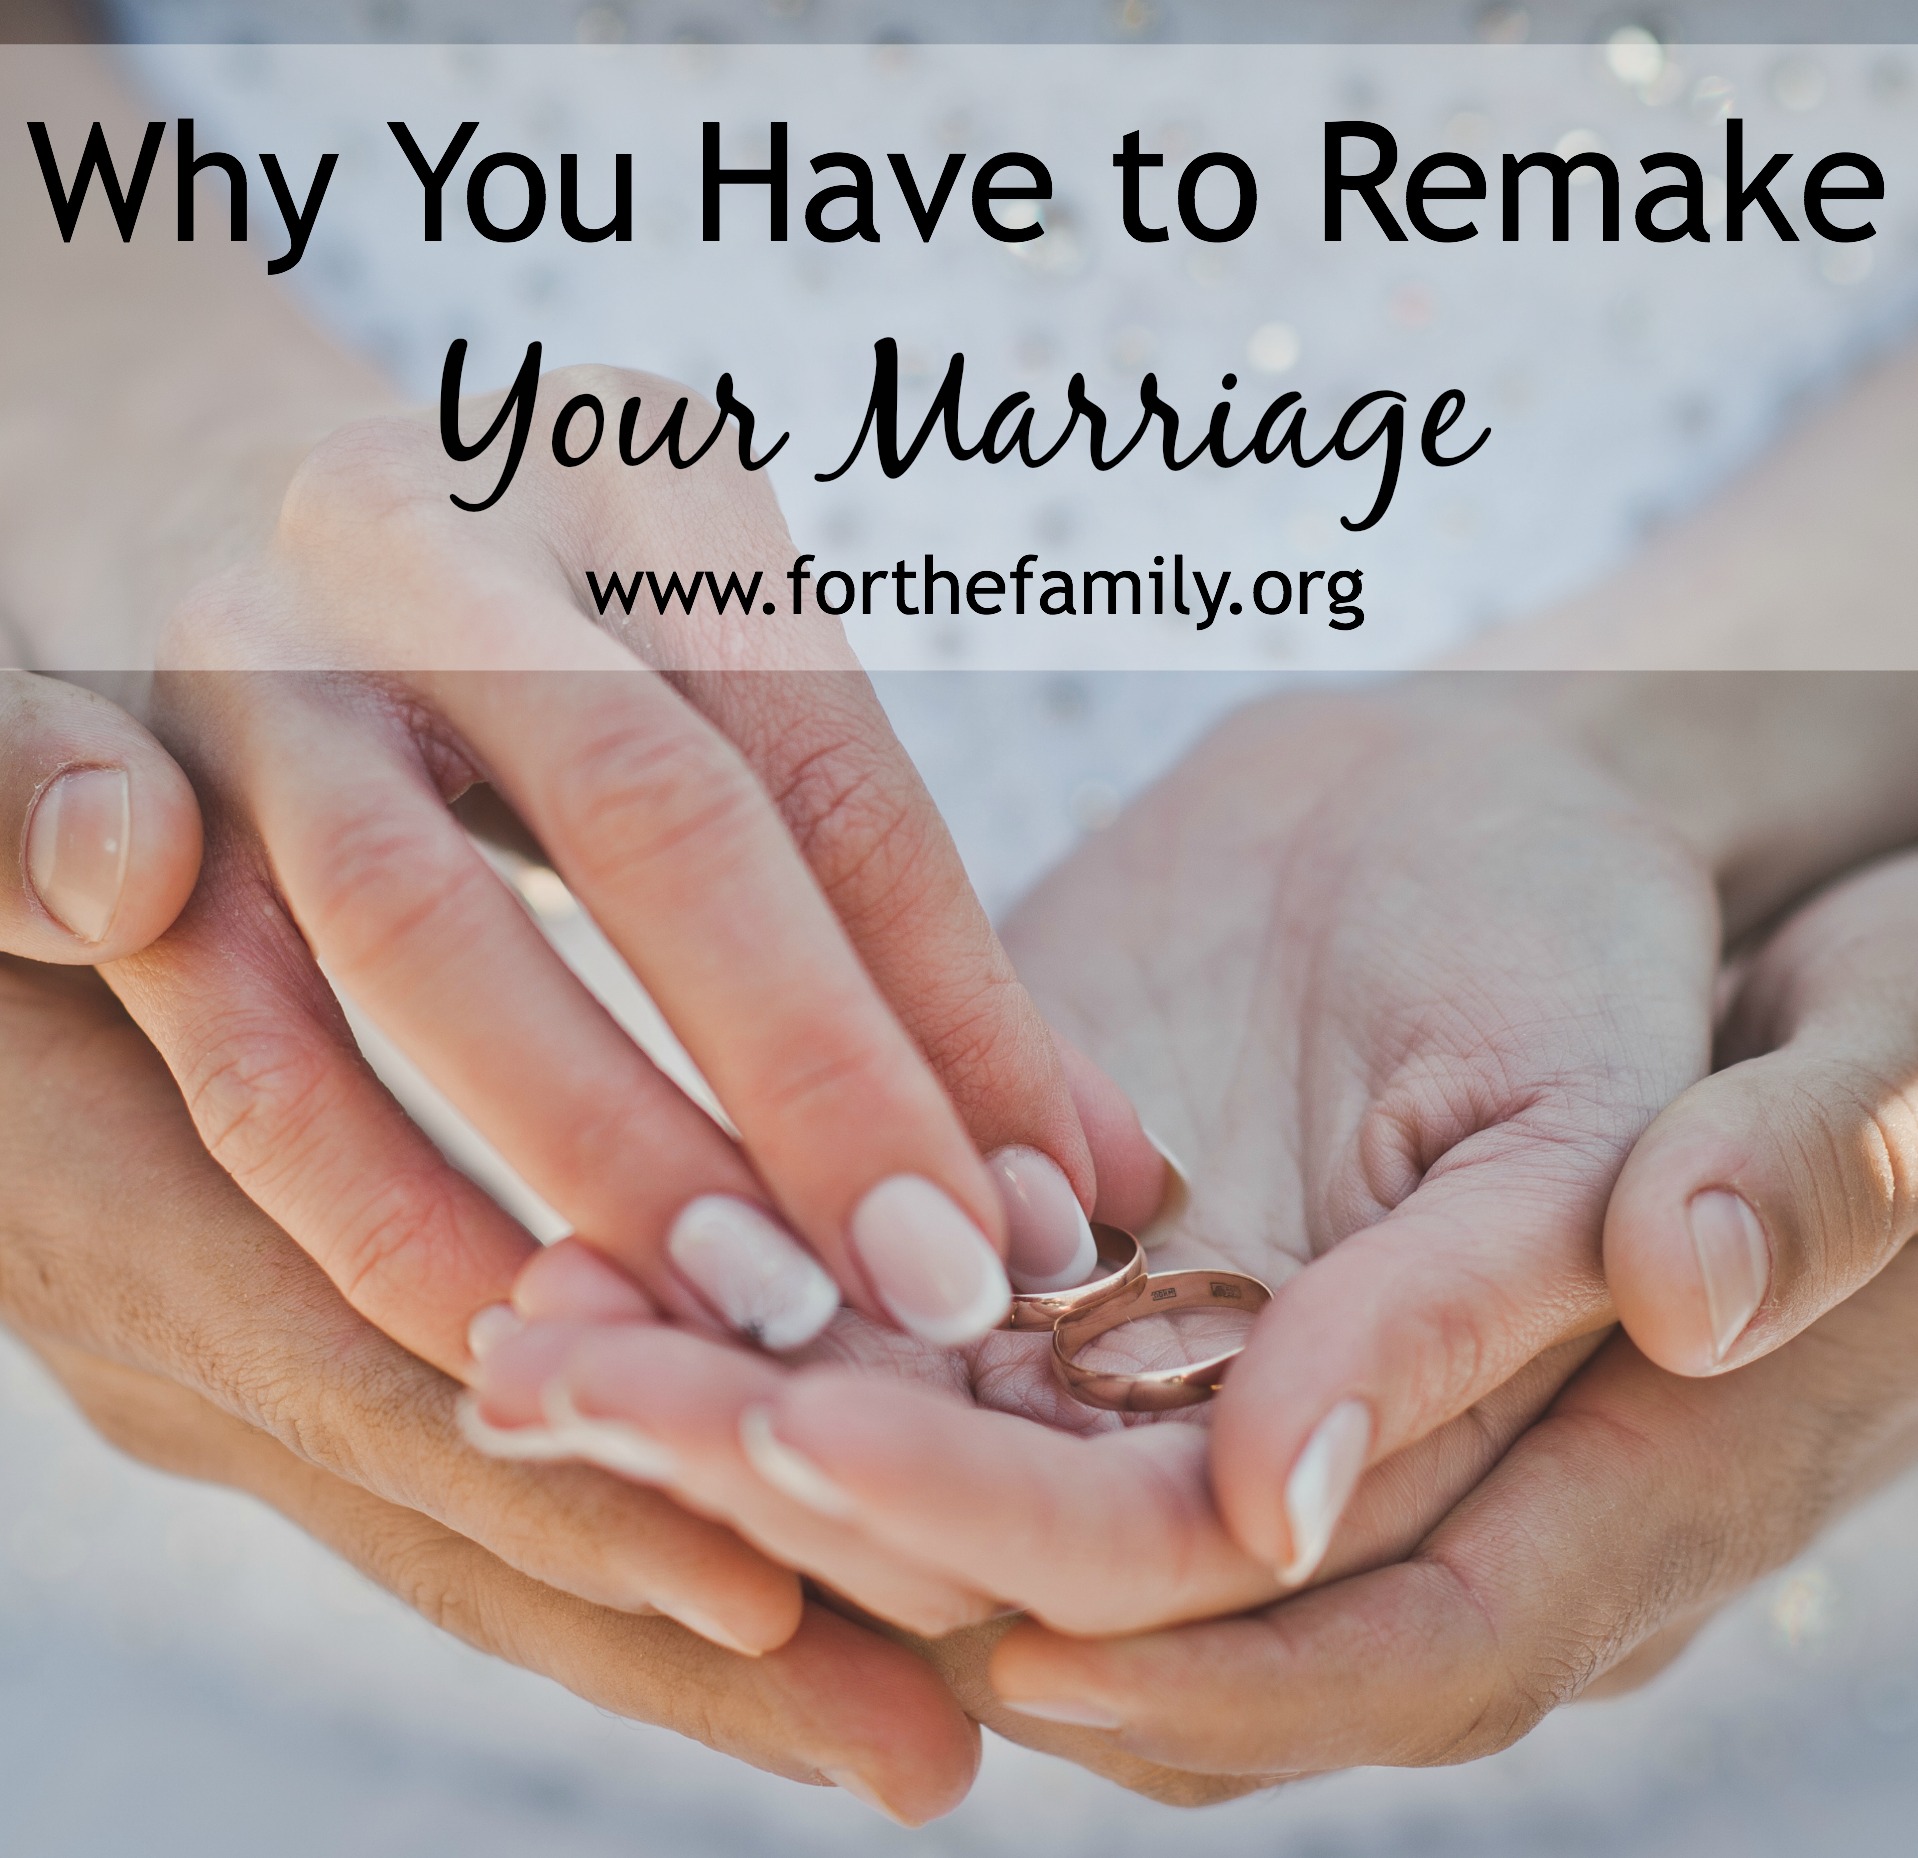 Why You Have to Remake Your Marriage (and a giveaway!)